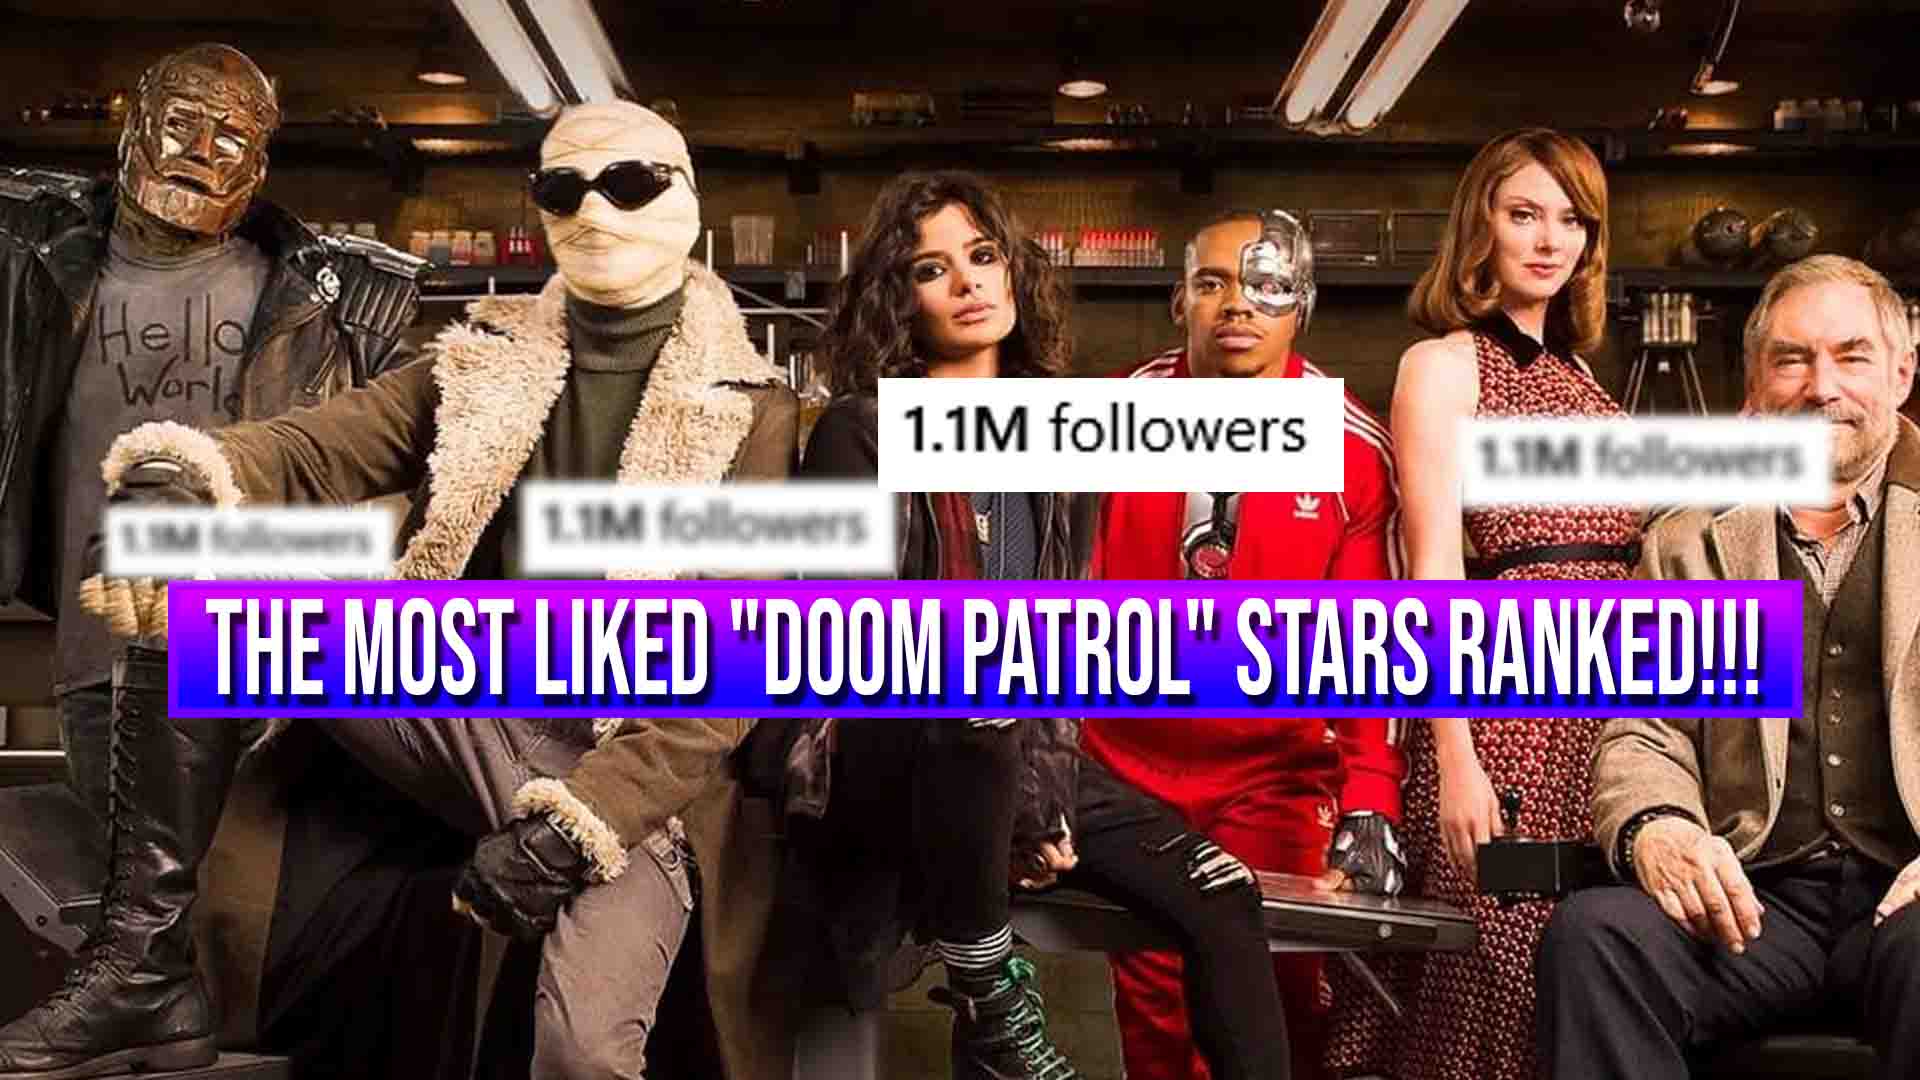 The Most Liked “Doom Patrol” Stars Ranked From Lowest